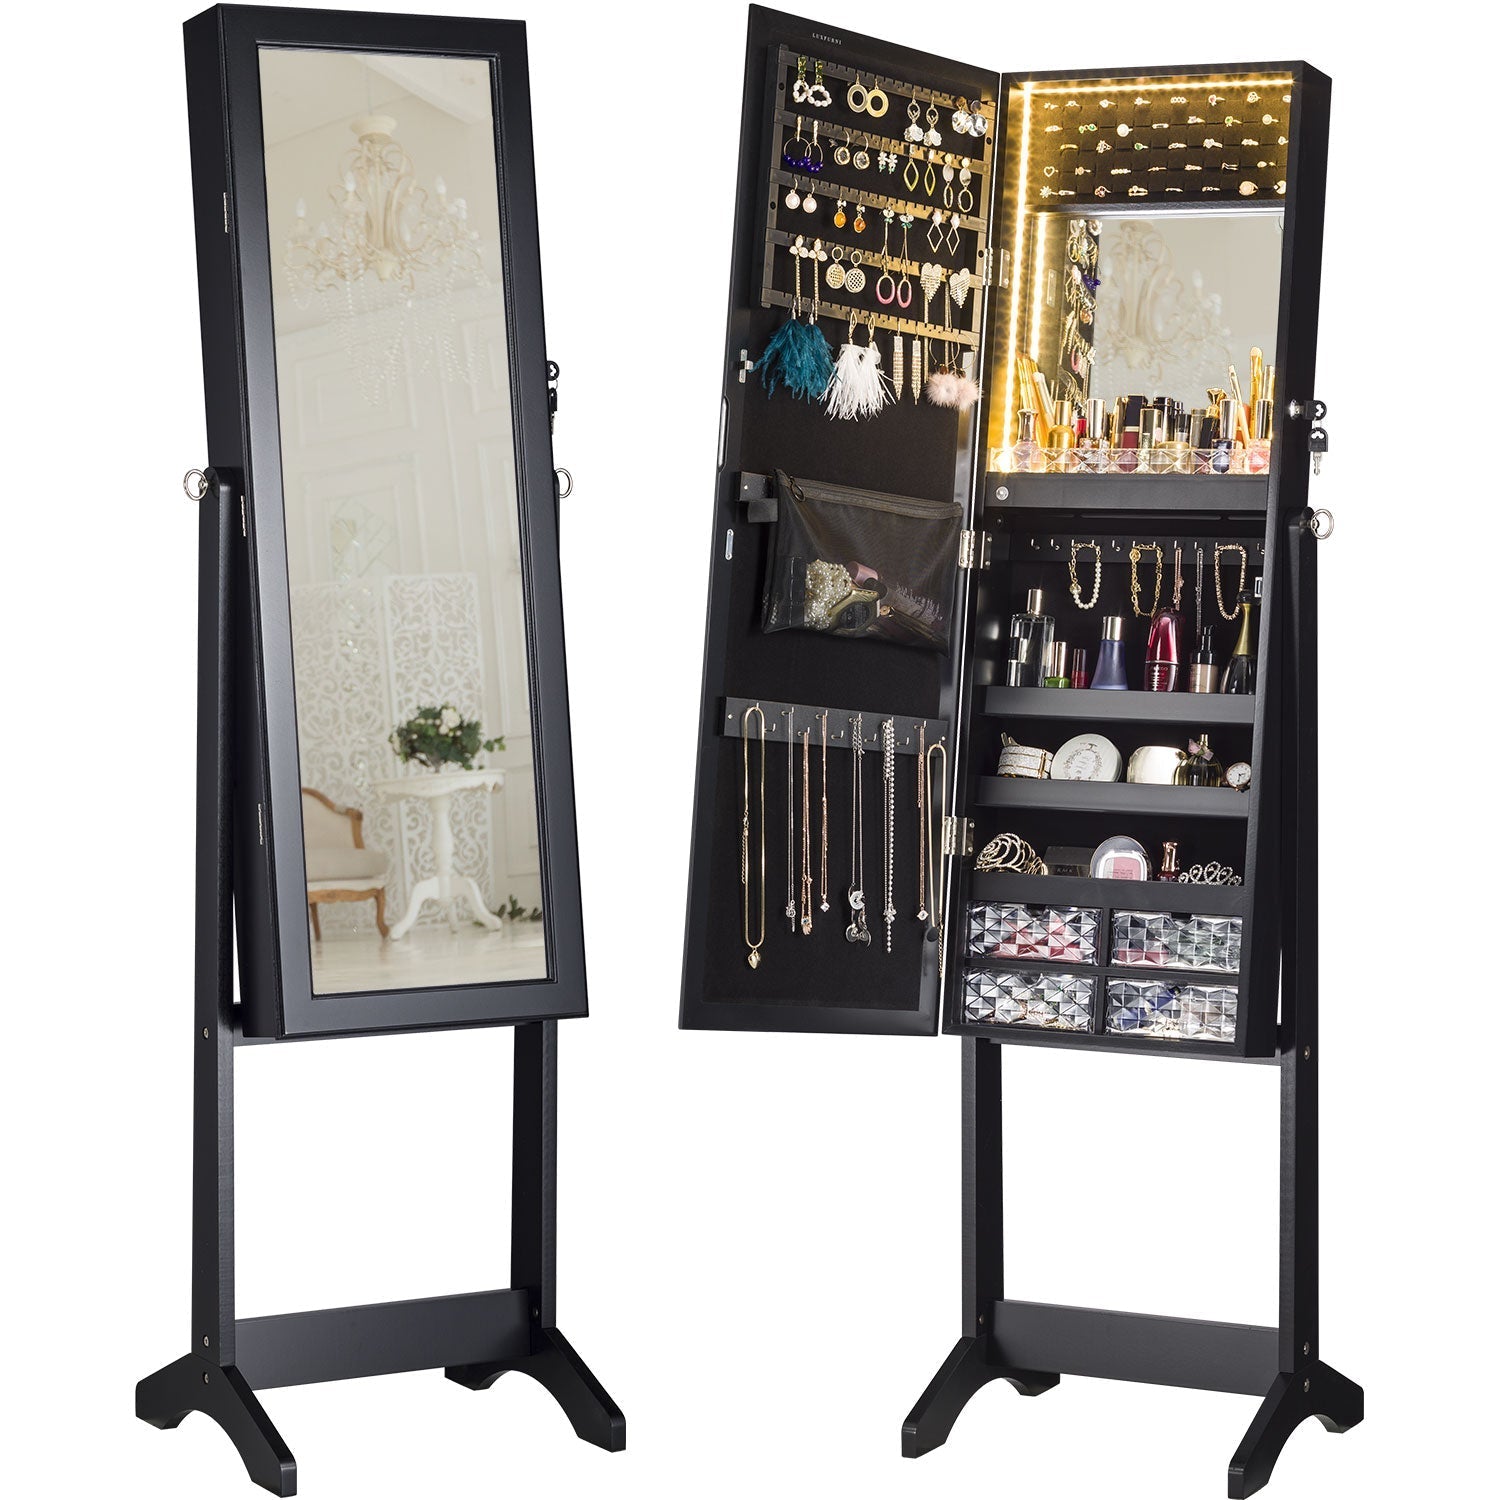 Luxfurni | Jewelry Armoire | Standing Stella 6 Jewelry Armoire Full Length Mirror With Built-in Lights - Black